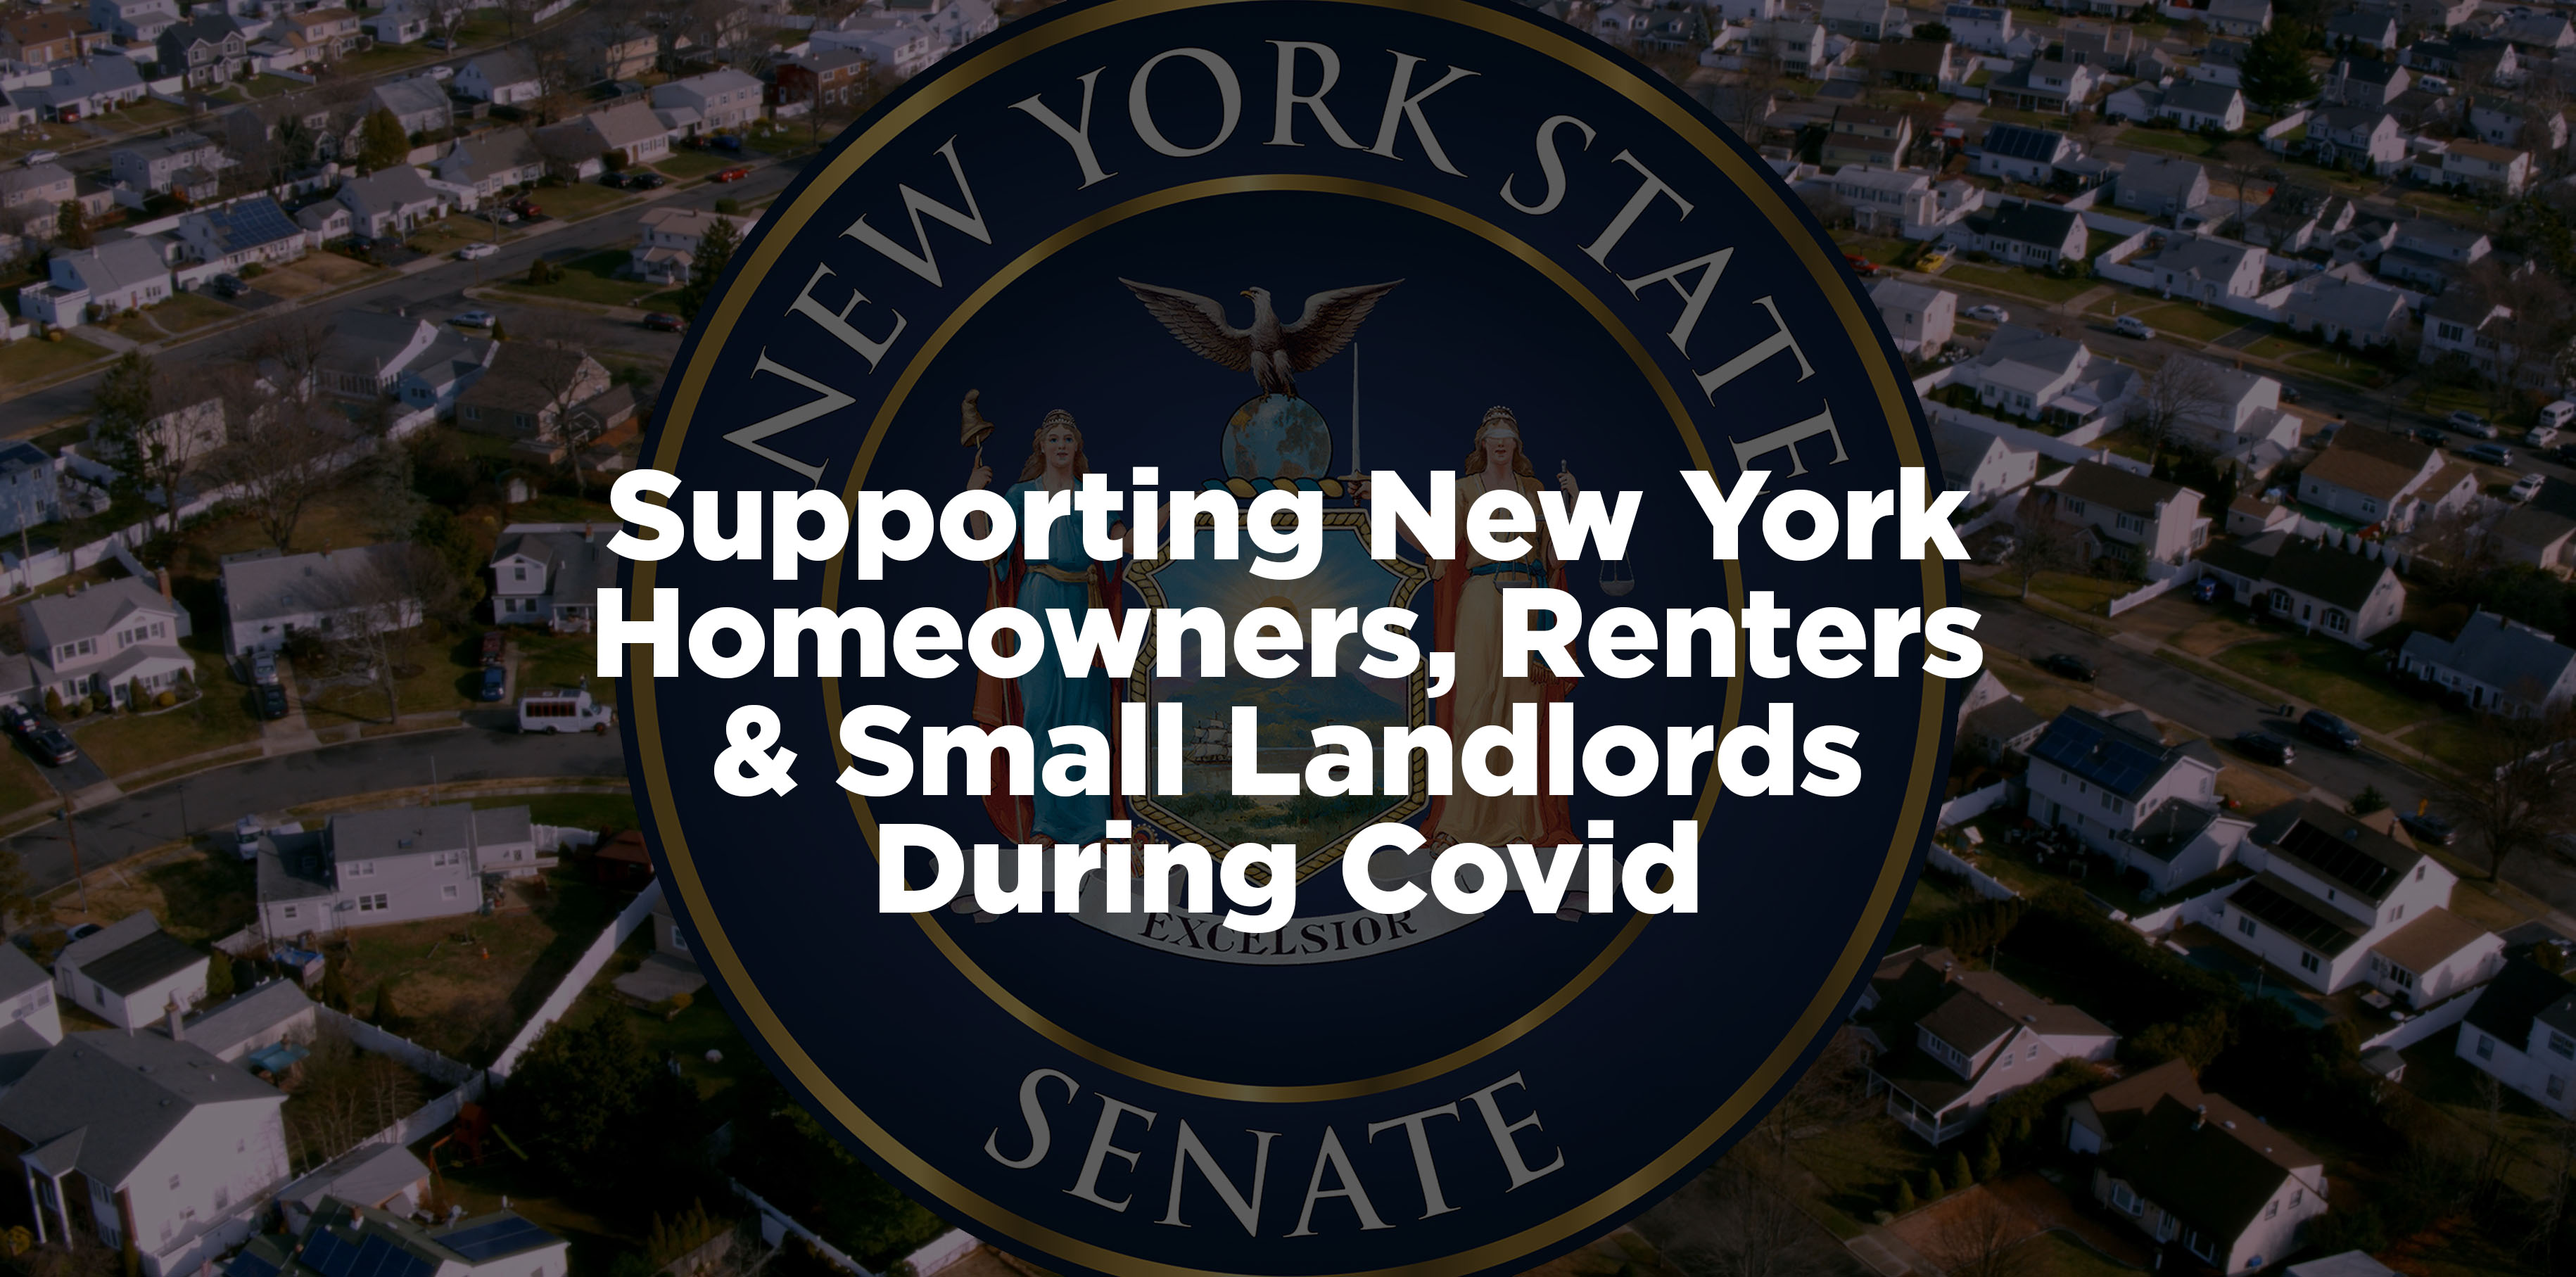 supporting new york landlords renters and homeowners during covid pandenmic